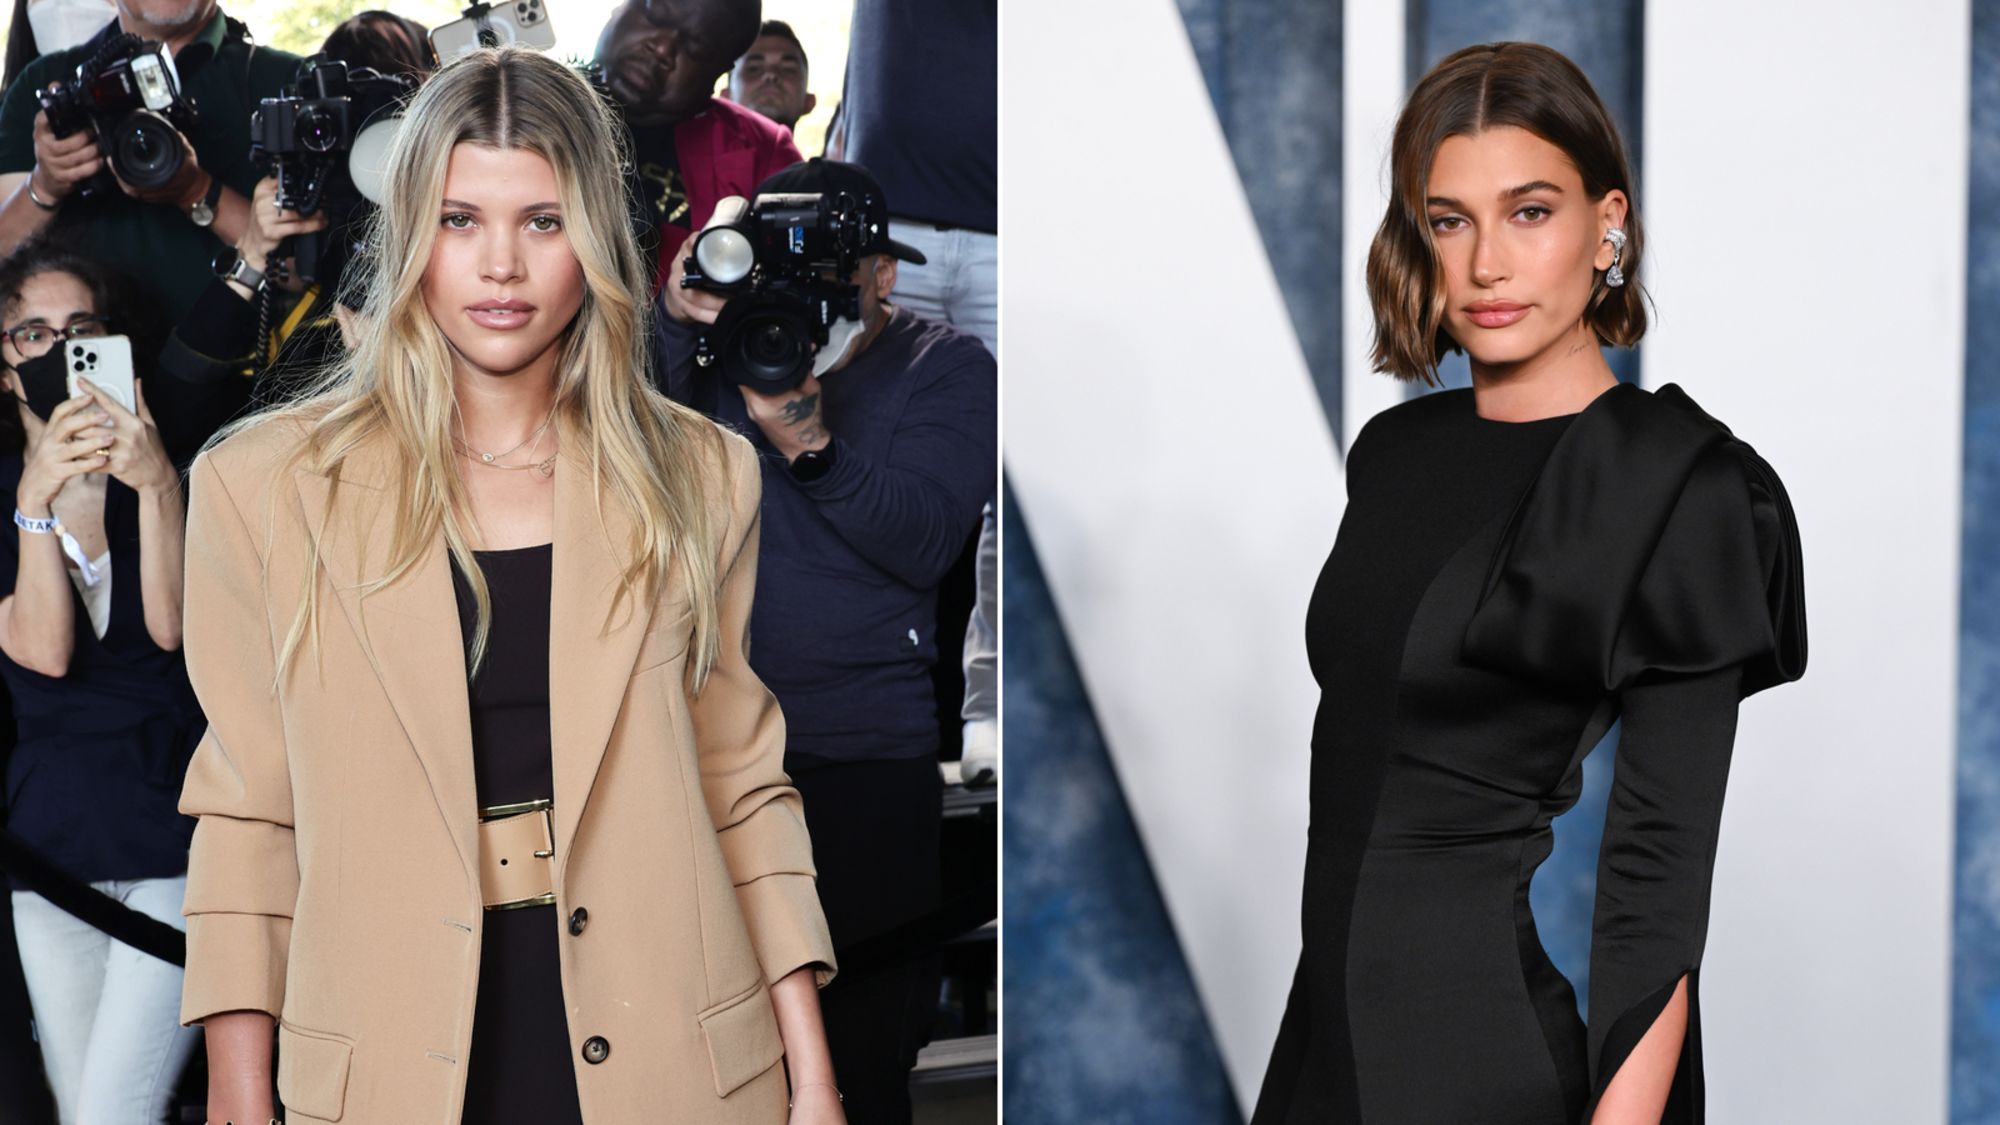 The 10 Best Female Celebrities To Get Fashion Inspiration From